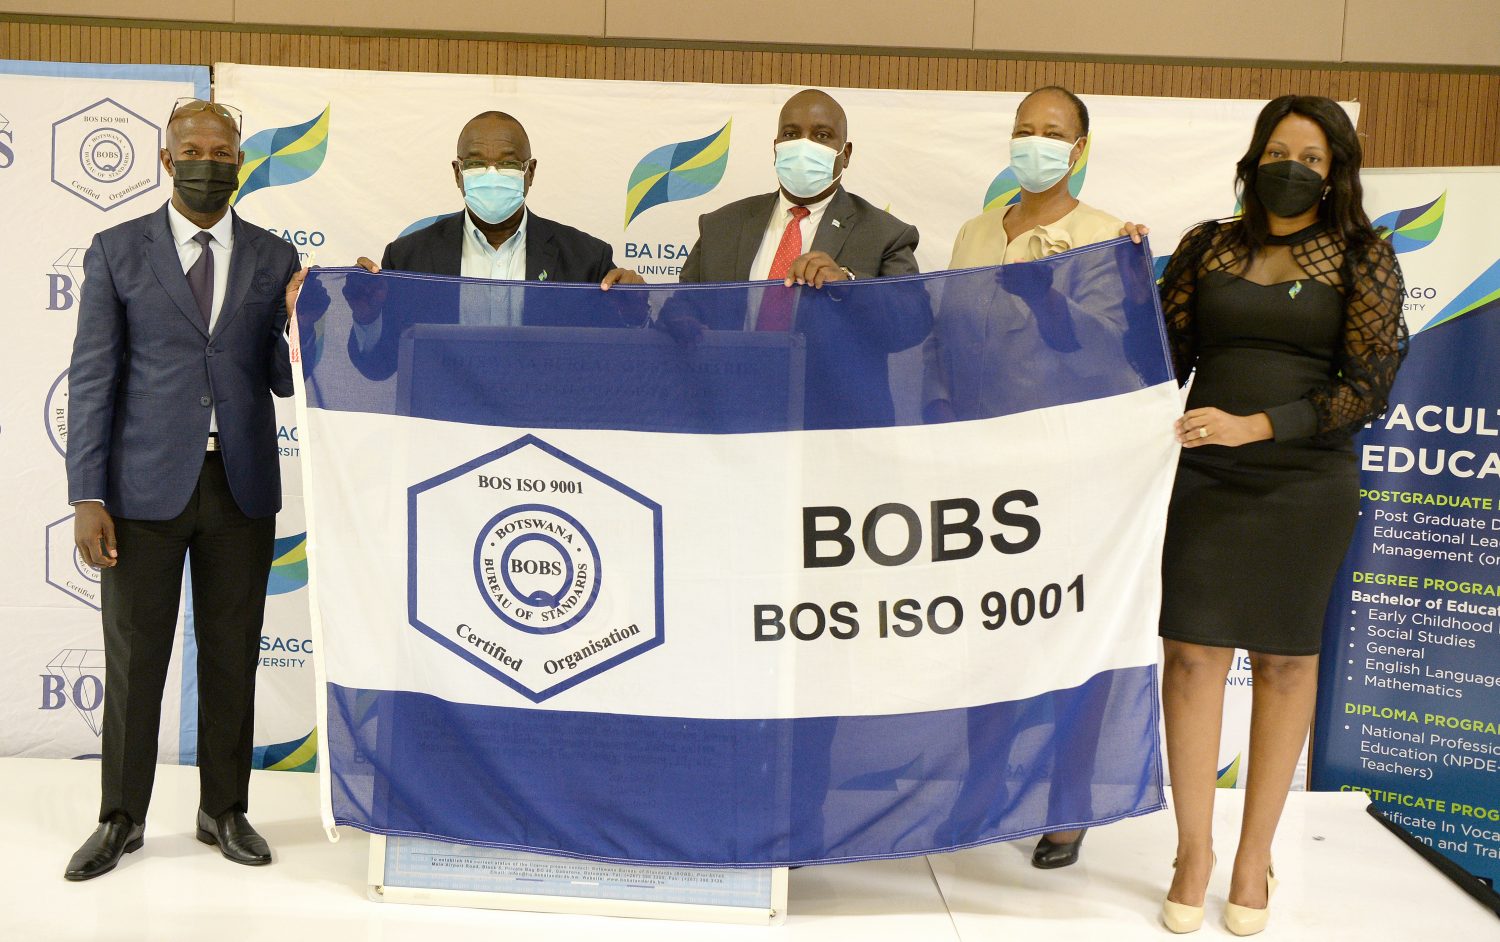 BA ISAGO University now BOBS ISO 9001:15 Quality Management System certified